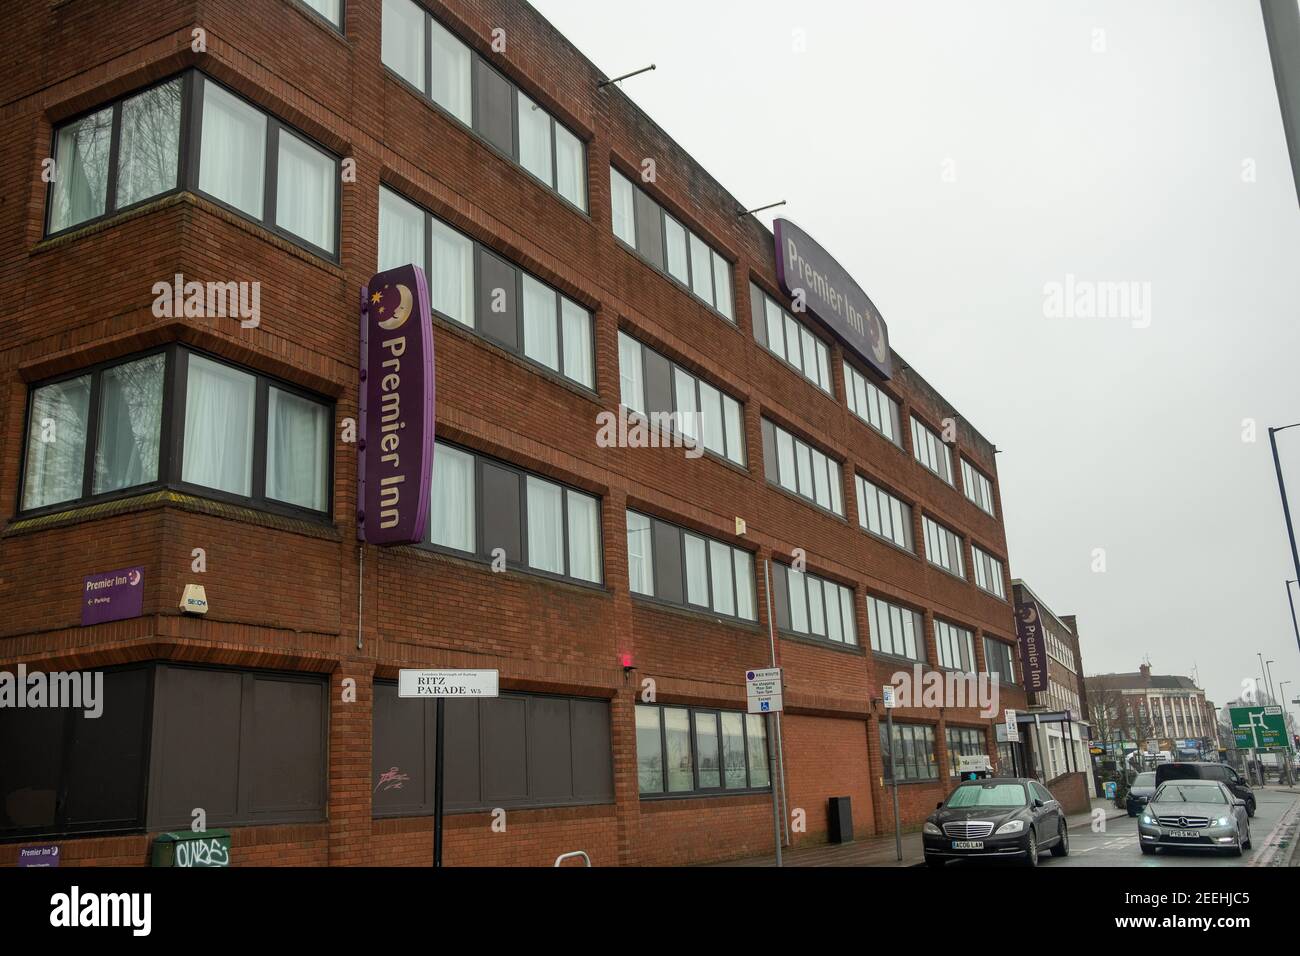 Hanger Lane High Resolution Stock Photography and Images - Alamy